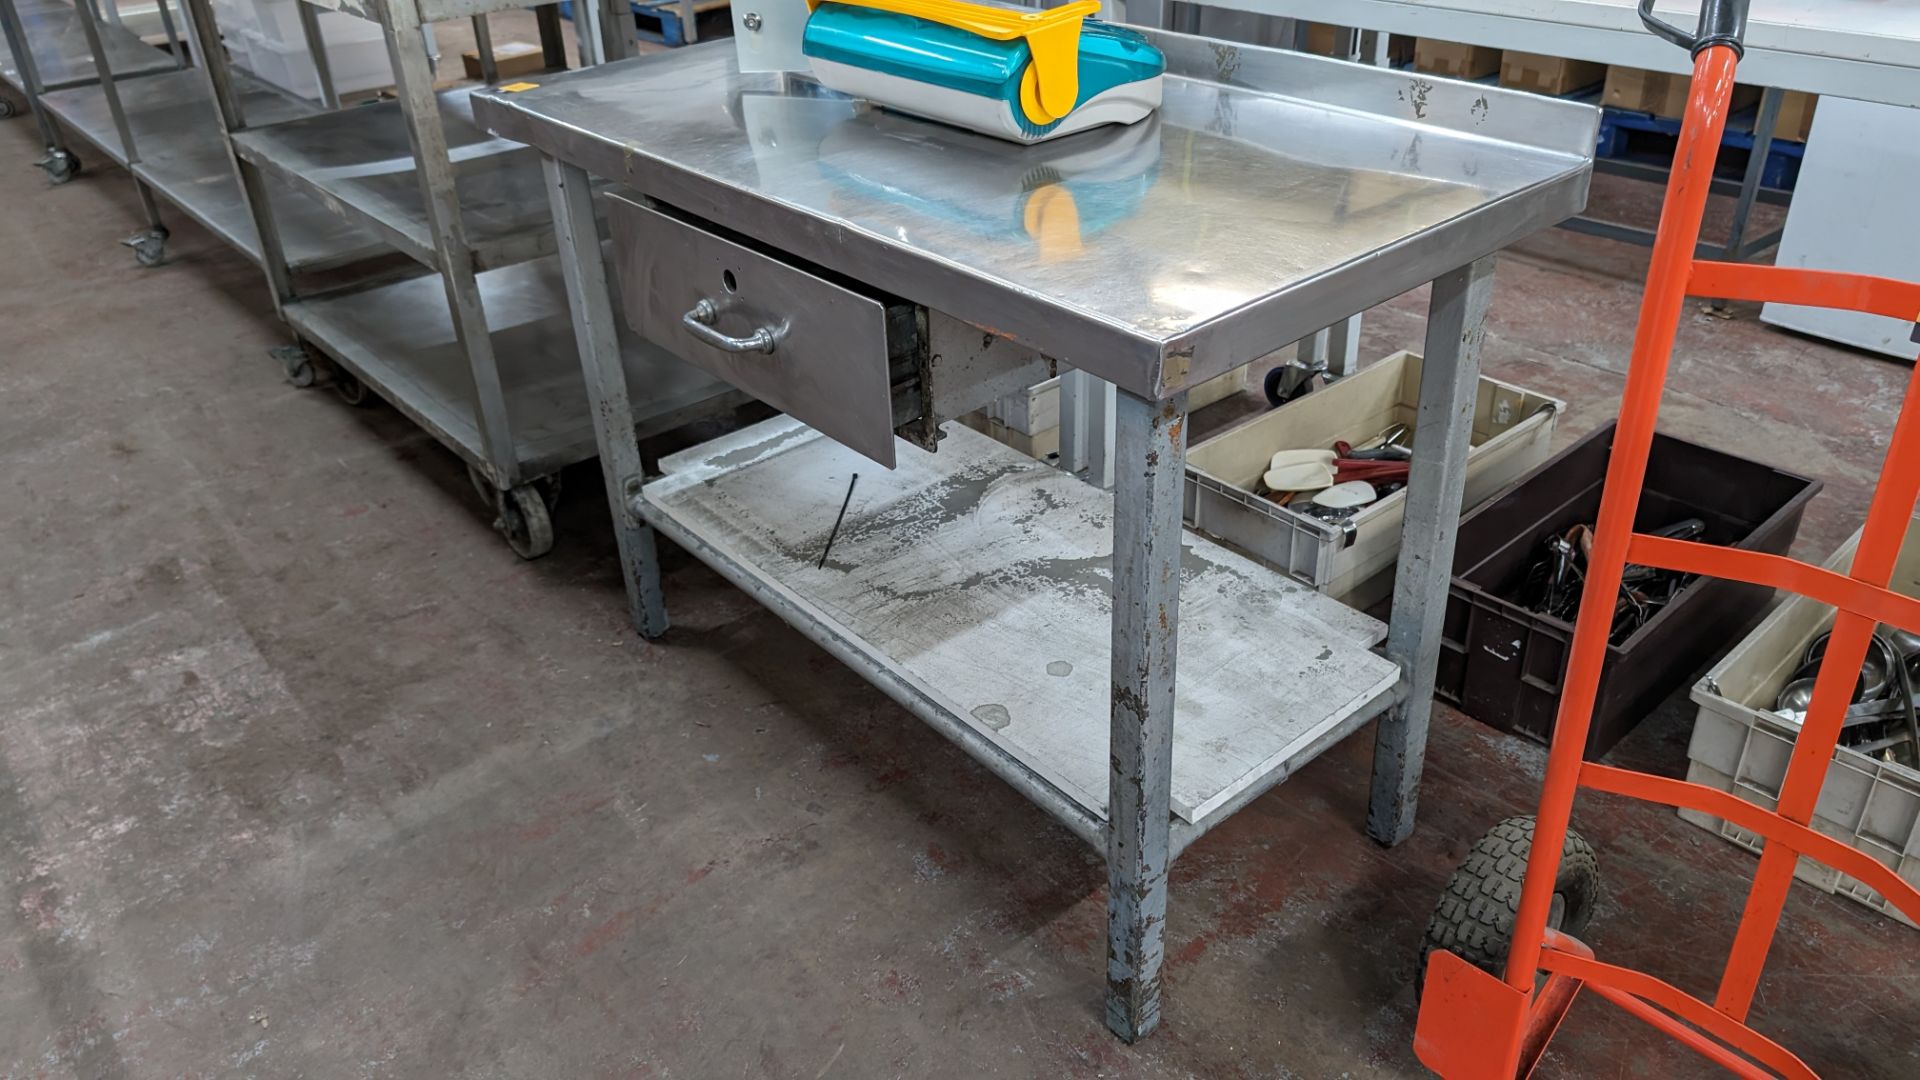 Stainless steel topped table with pull out drawer